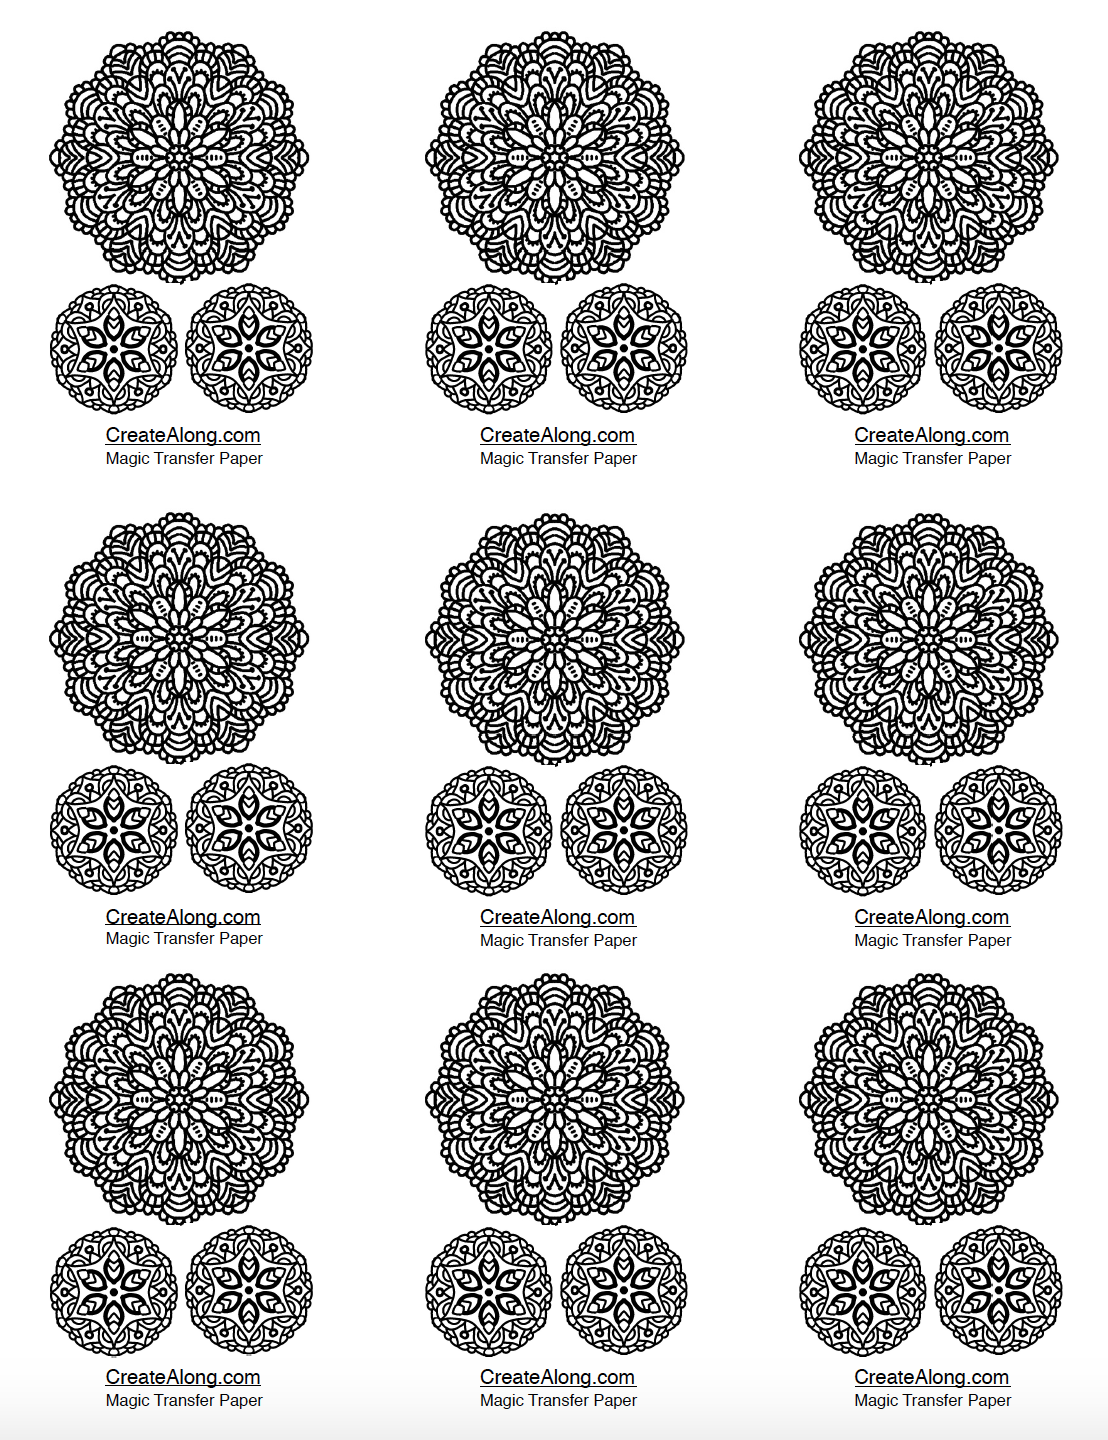 Digital Floral Mandala Image Transfer PDF for creating images on raw polymer clay and for use with Magic Transfer Paper